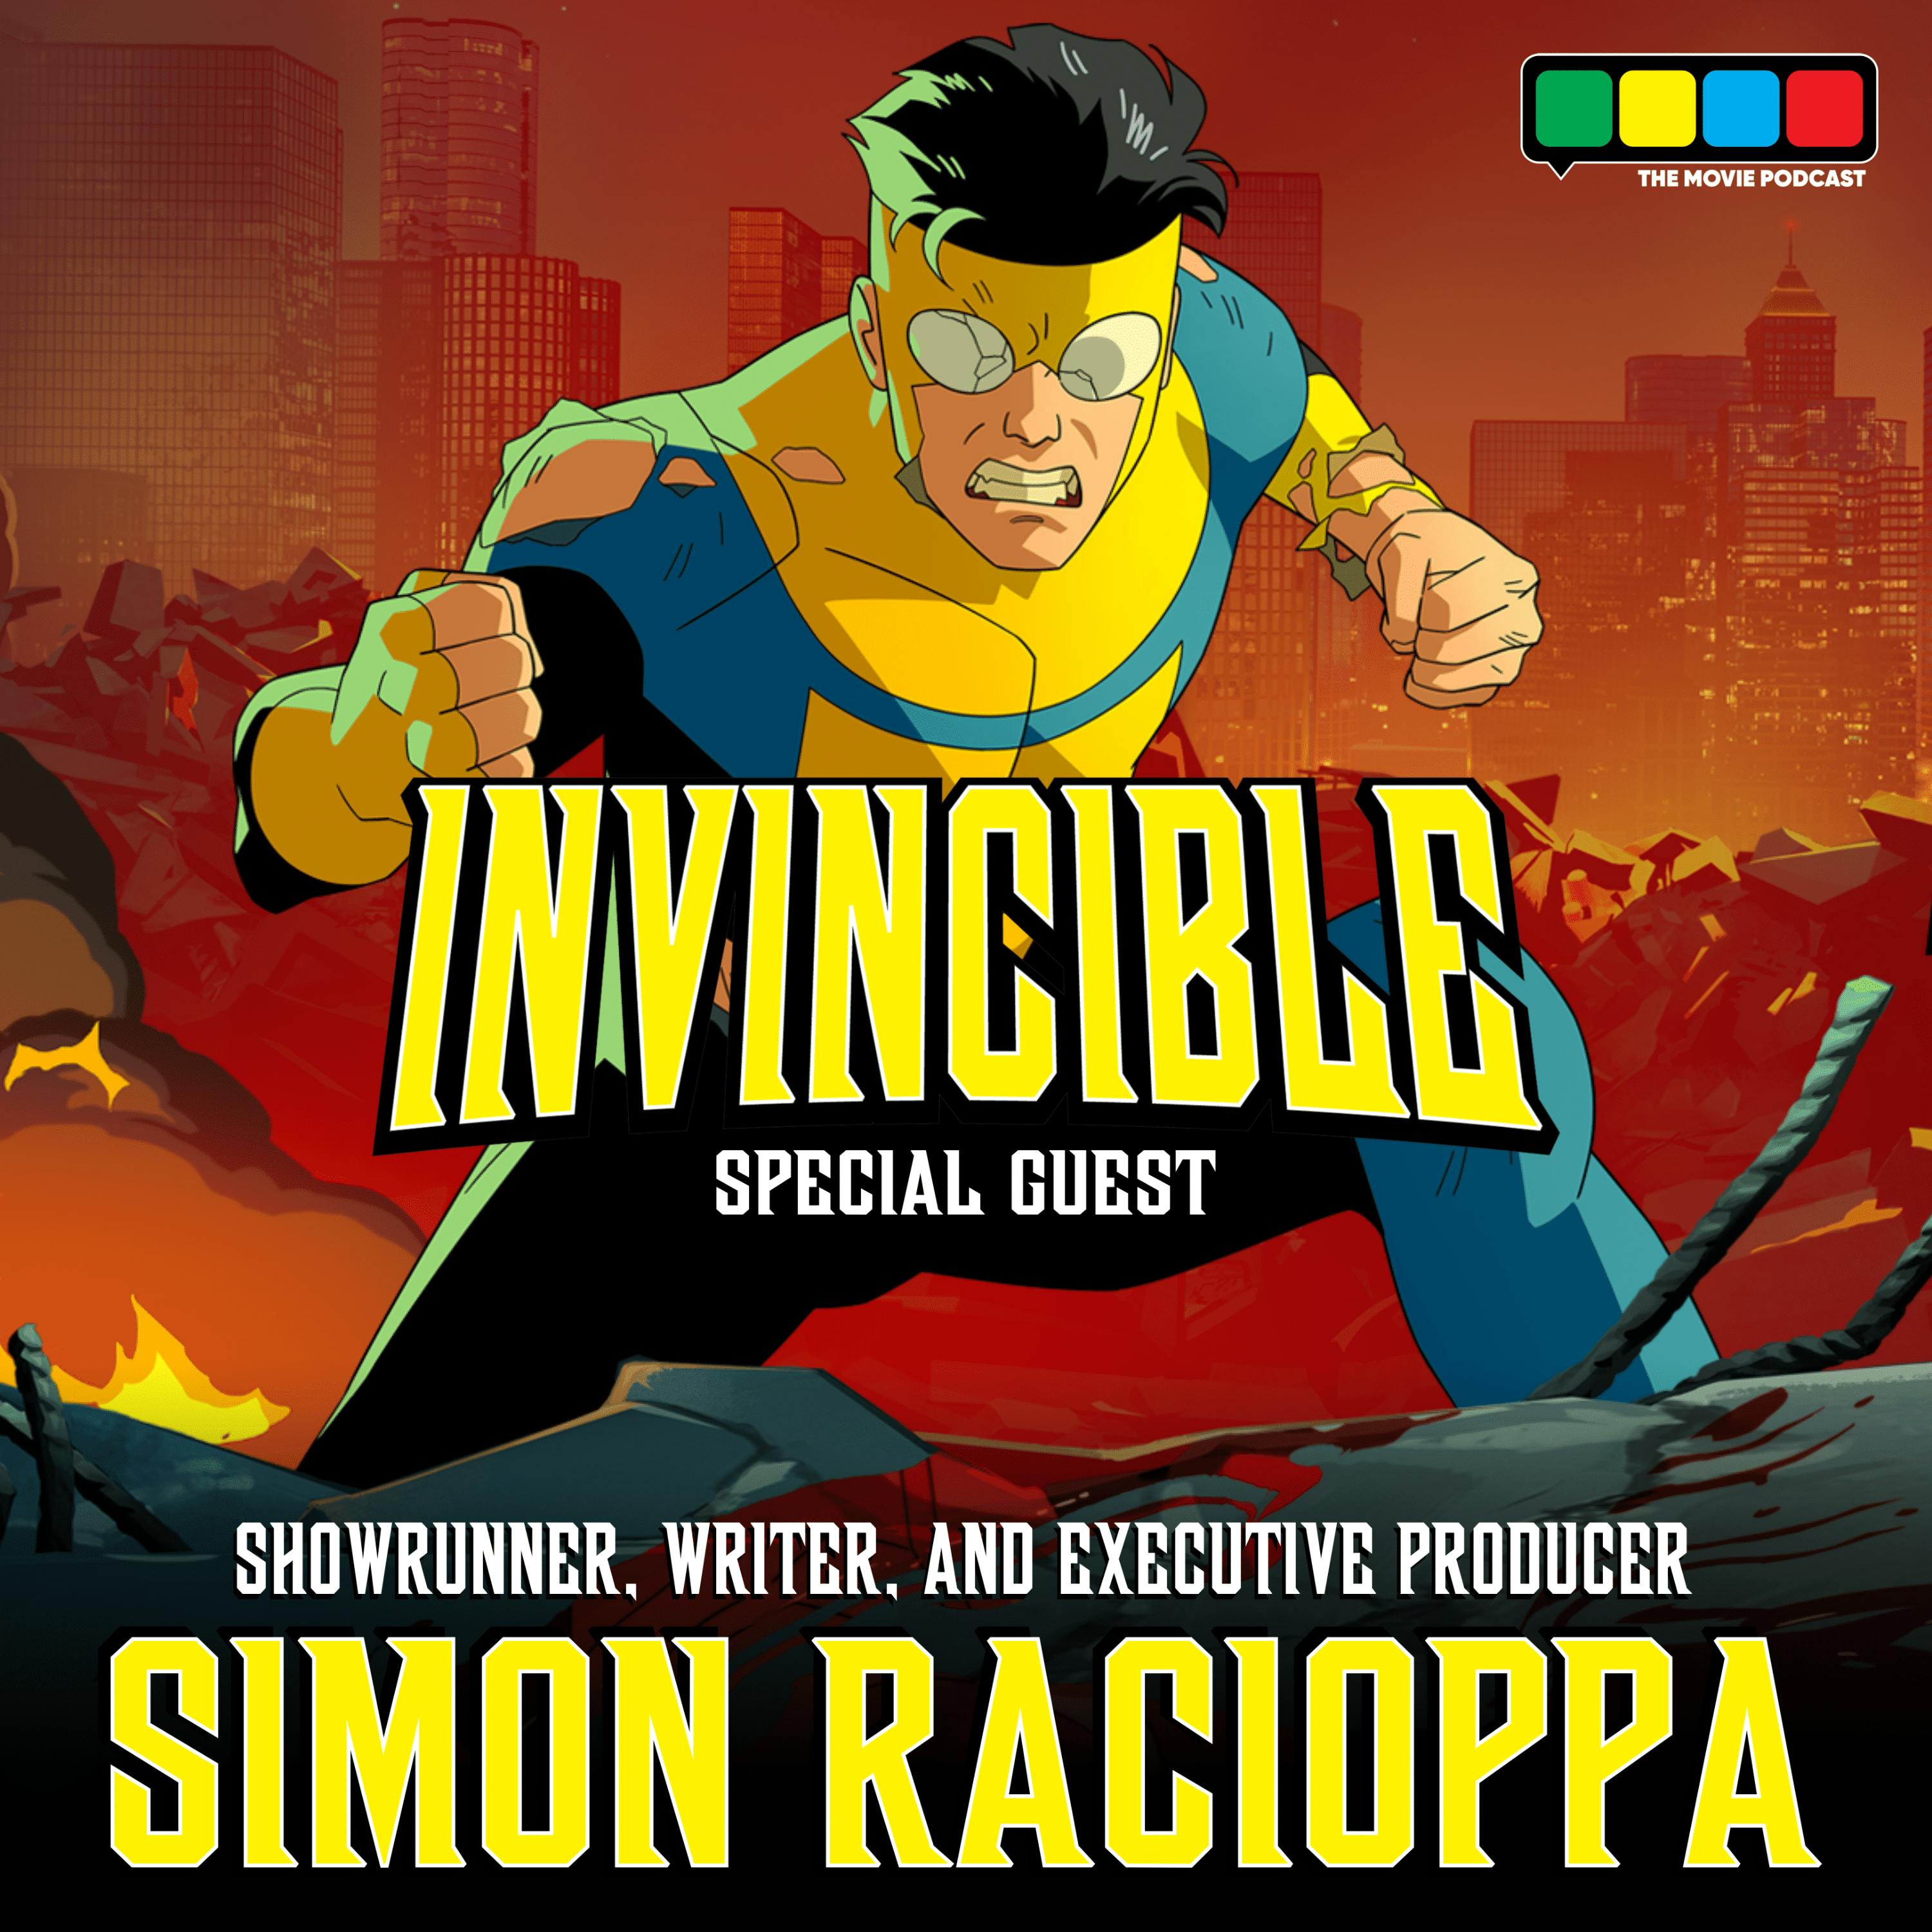 Invincible Interview with Simon Racioppa (Showrunner, Writer, and Executive Producer)